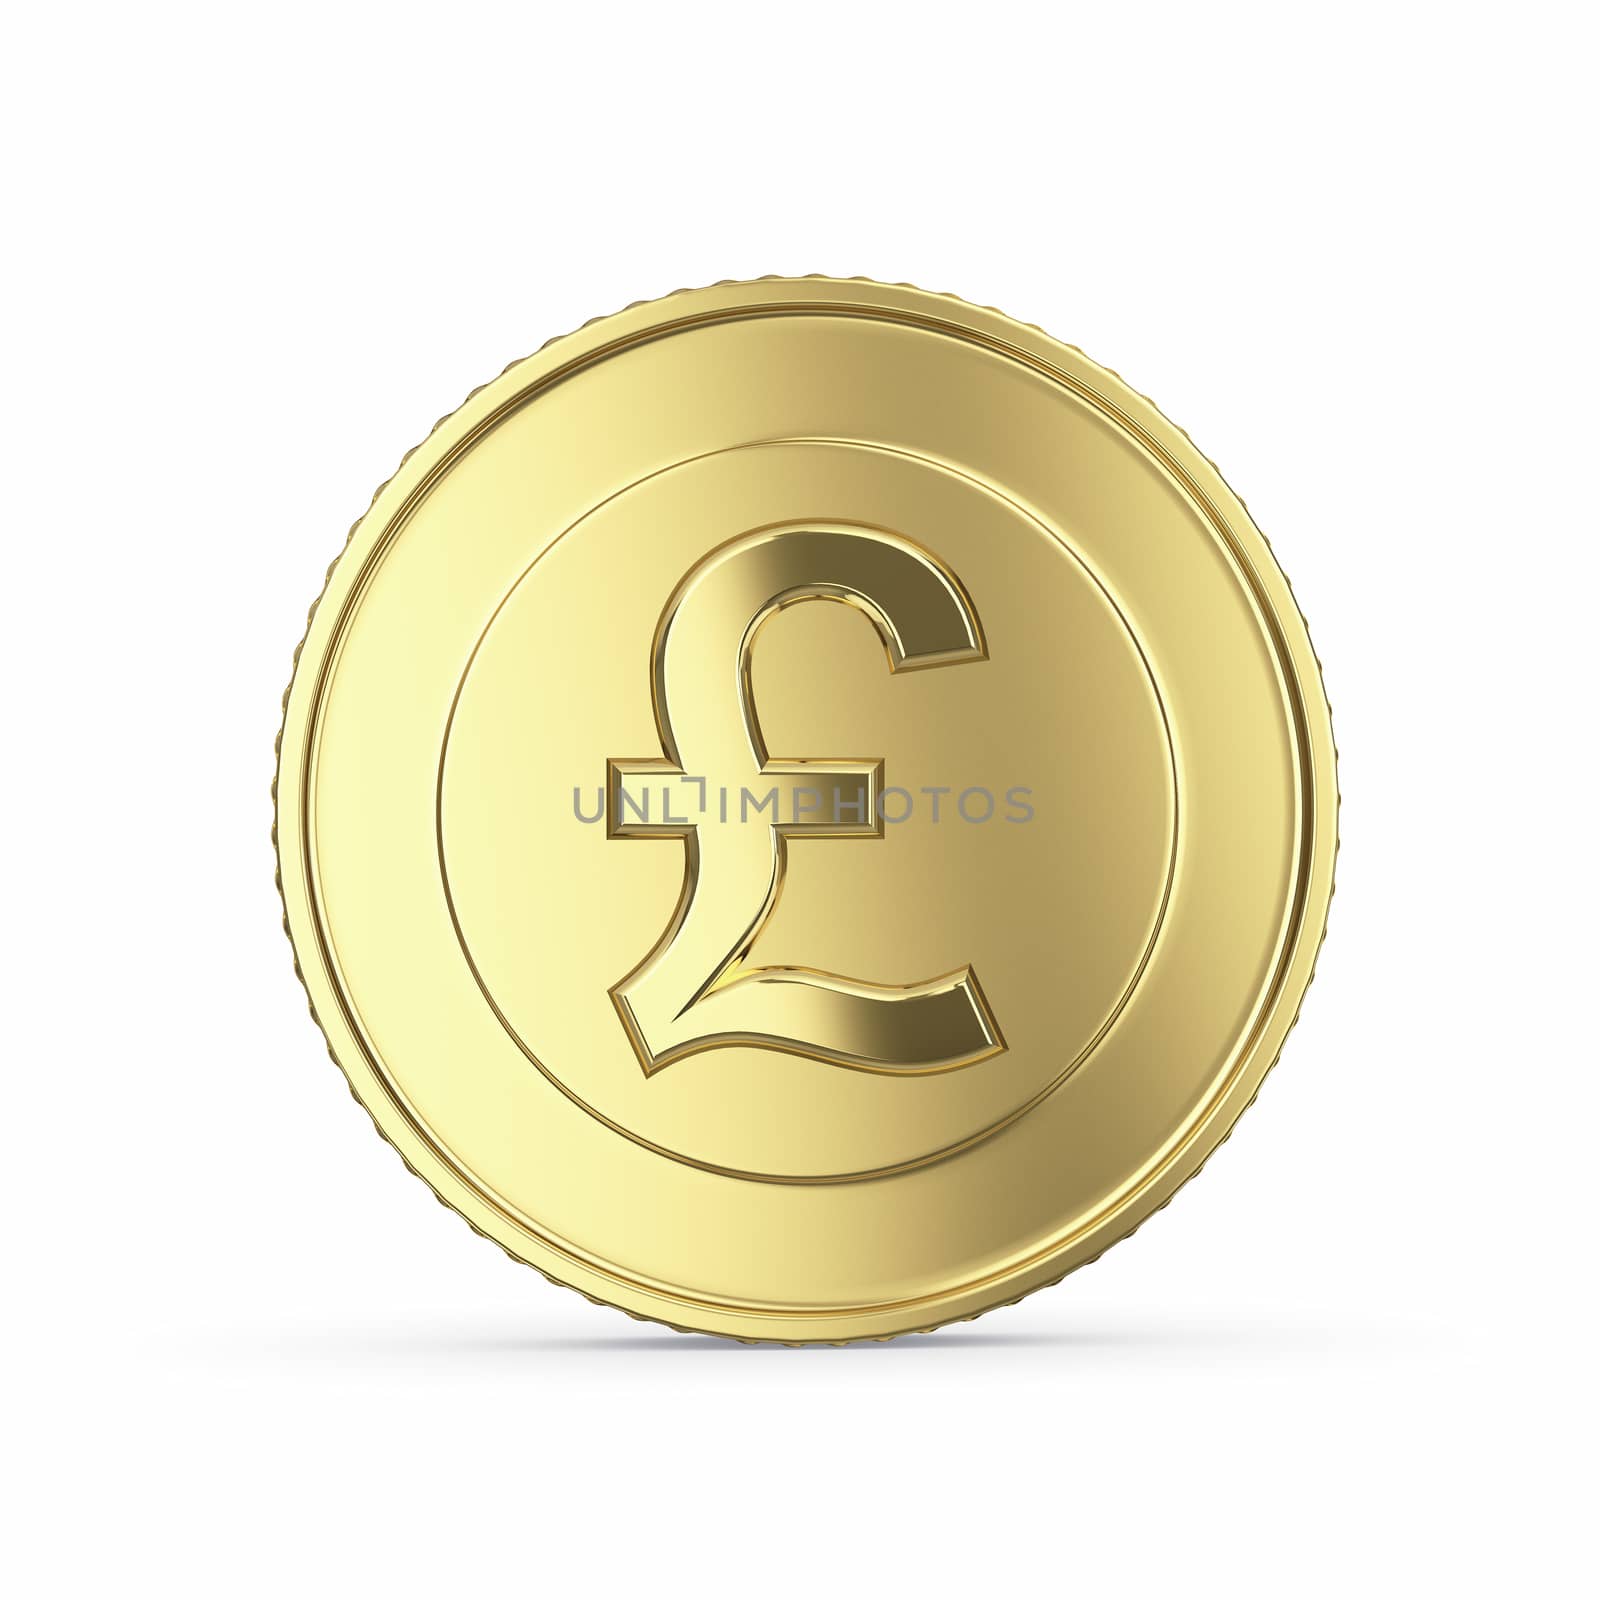 Golden pound coin isolated on white background with clipping path